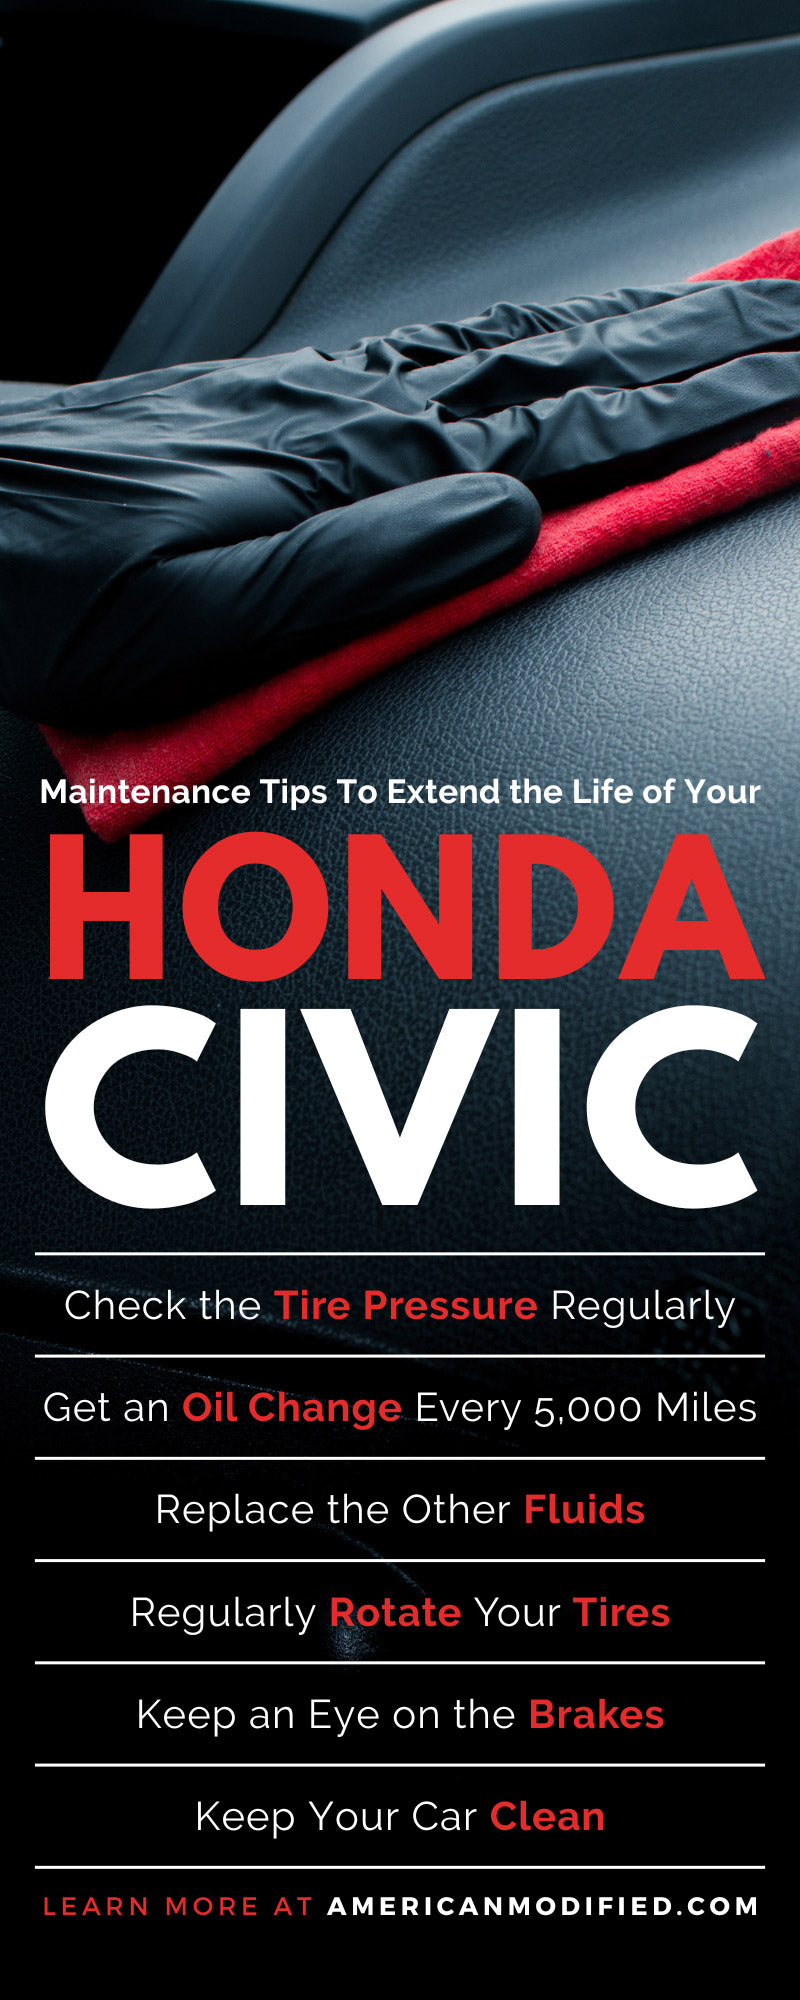 Maintenance Tips To Extend the Life of Your Honda Civic